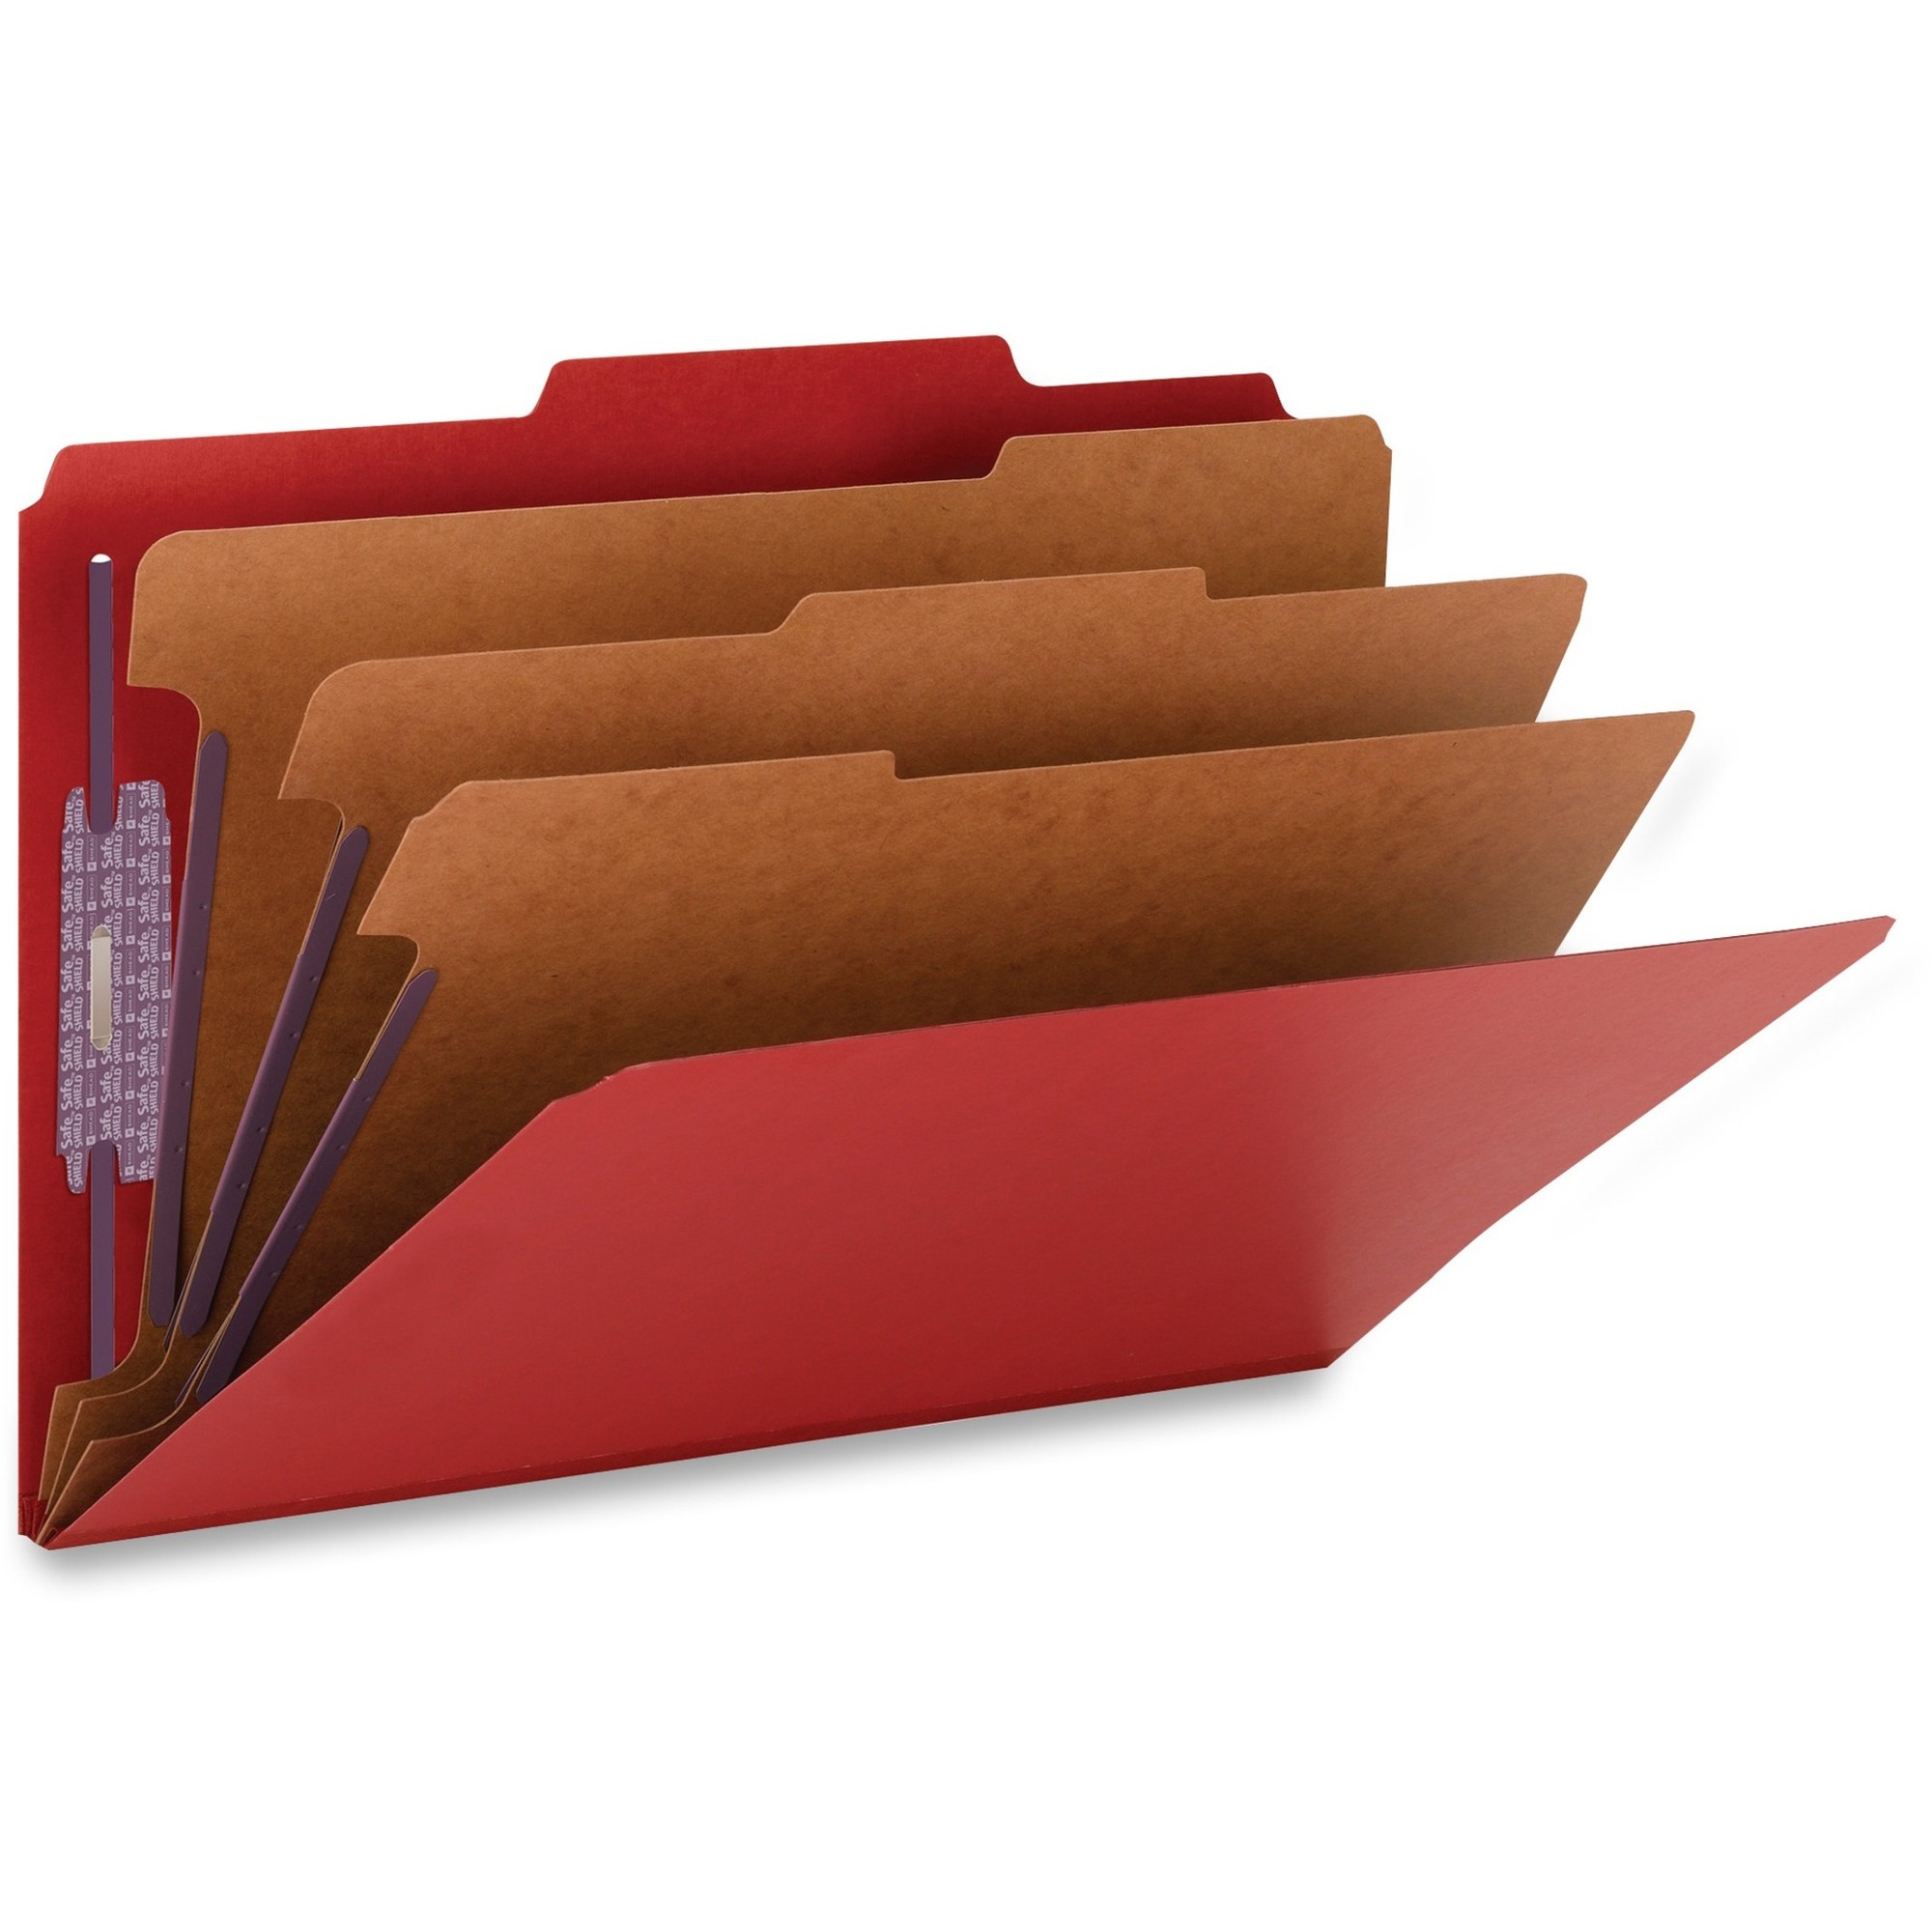 3" Expansion Folders with 2/5 Cut Tab, Legal, Eight-Section, Bright Red, 10/Box